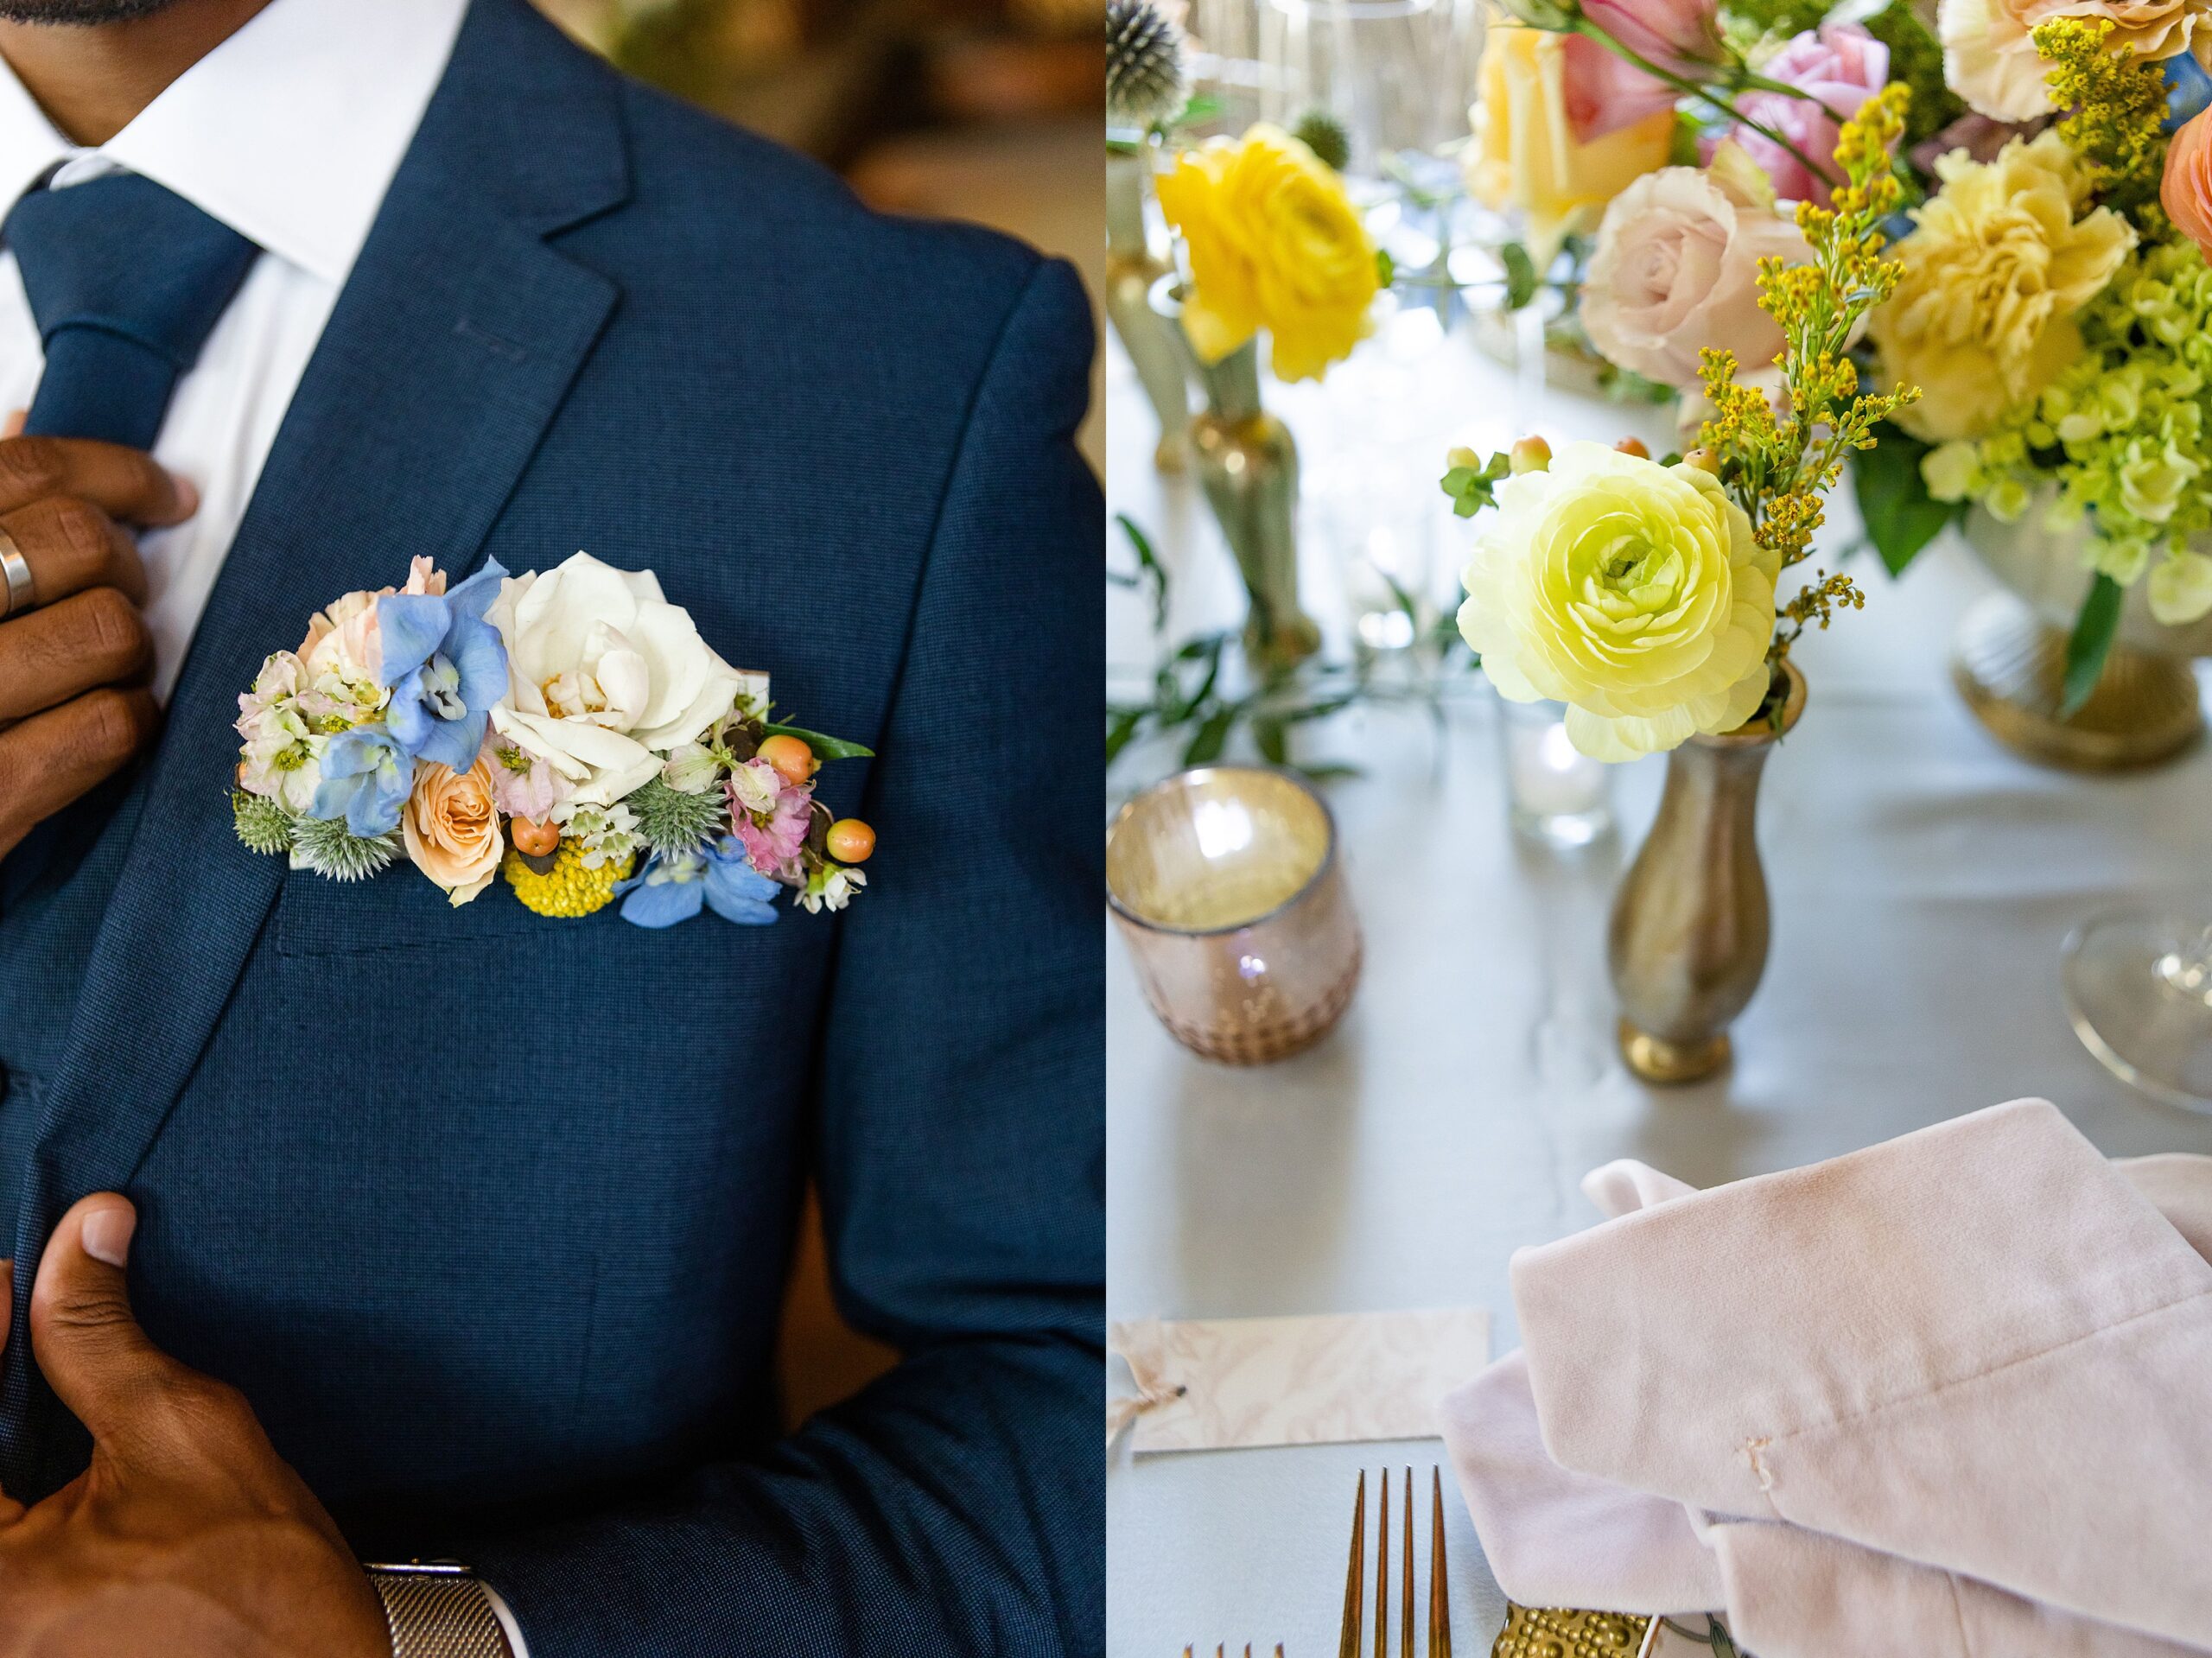 Groom and table details at an intimate wedding venues in Las Vegas